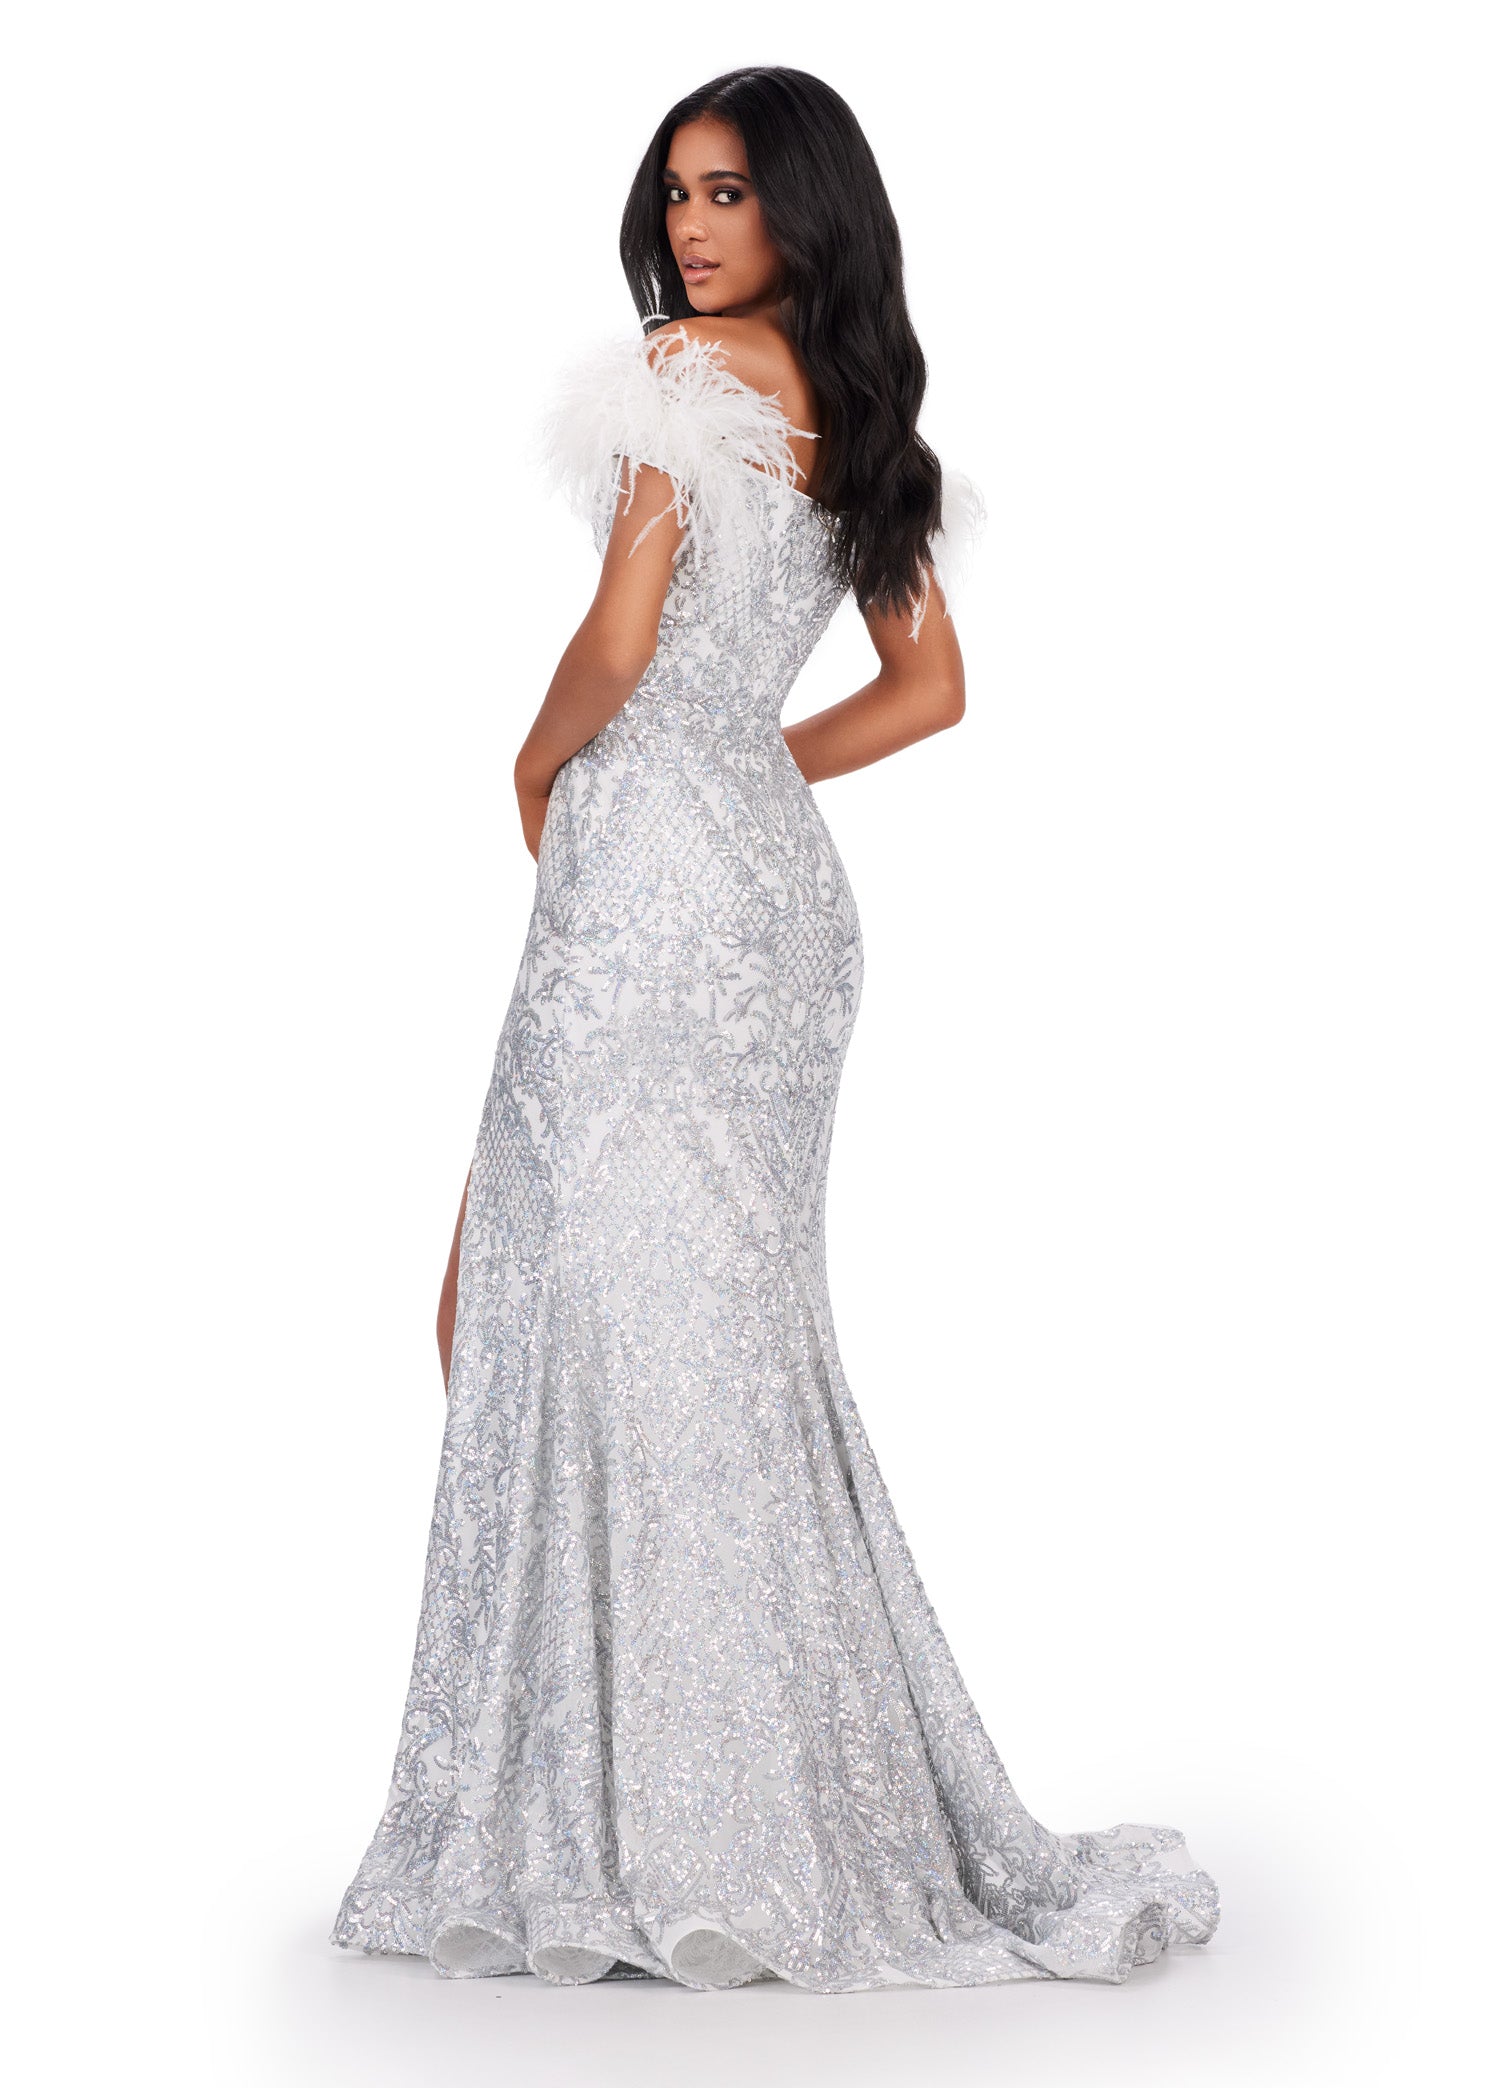 Elevate your prom look with the stunning Ashley Lauren 11463 Long Sequin Mermaid Prom Dress. The off the shoulder design and feather embellishments add a touch of glamour, while the slit detail adds a touch of flirtiness. This dress is perfect for making a statement on your special night. Stand out in this off the shoulder stretch sequin gown. We are living for this sweetheart neckline and feather details.